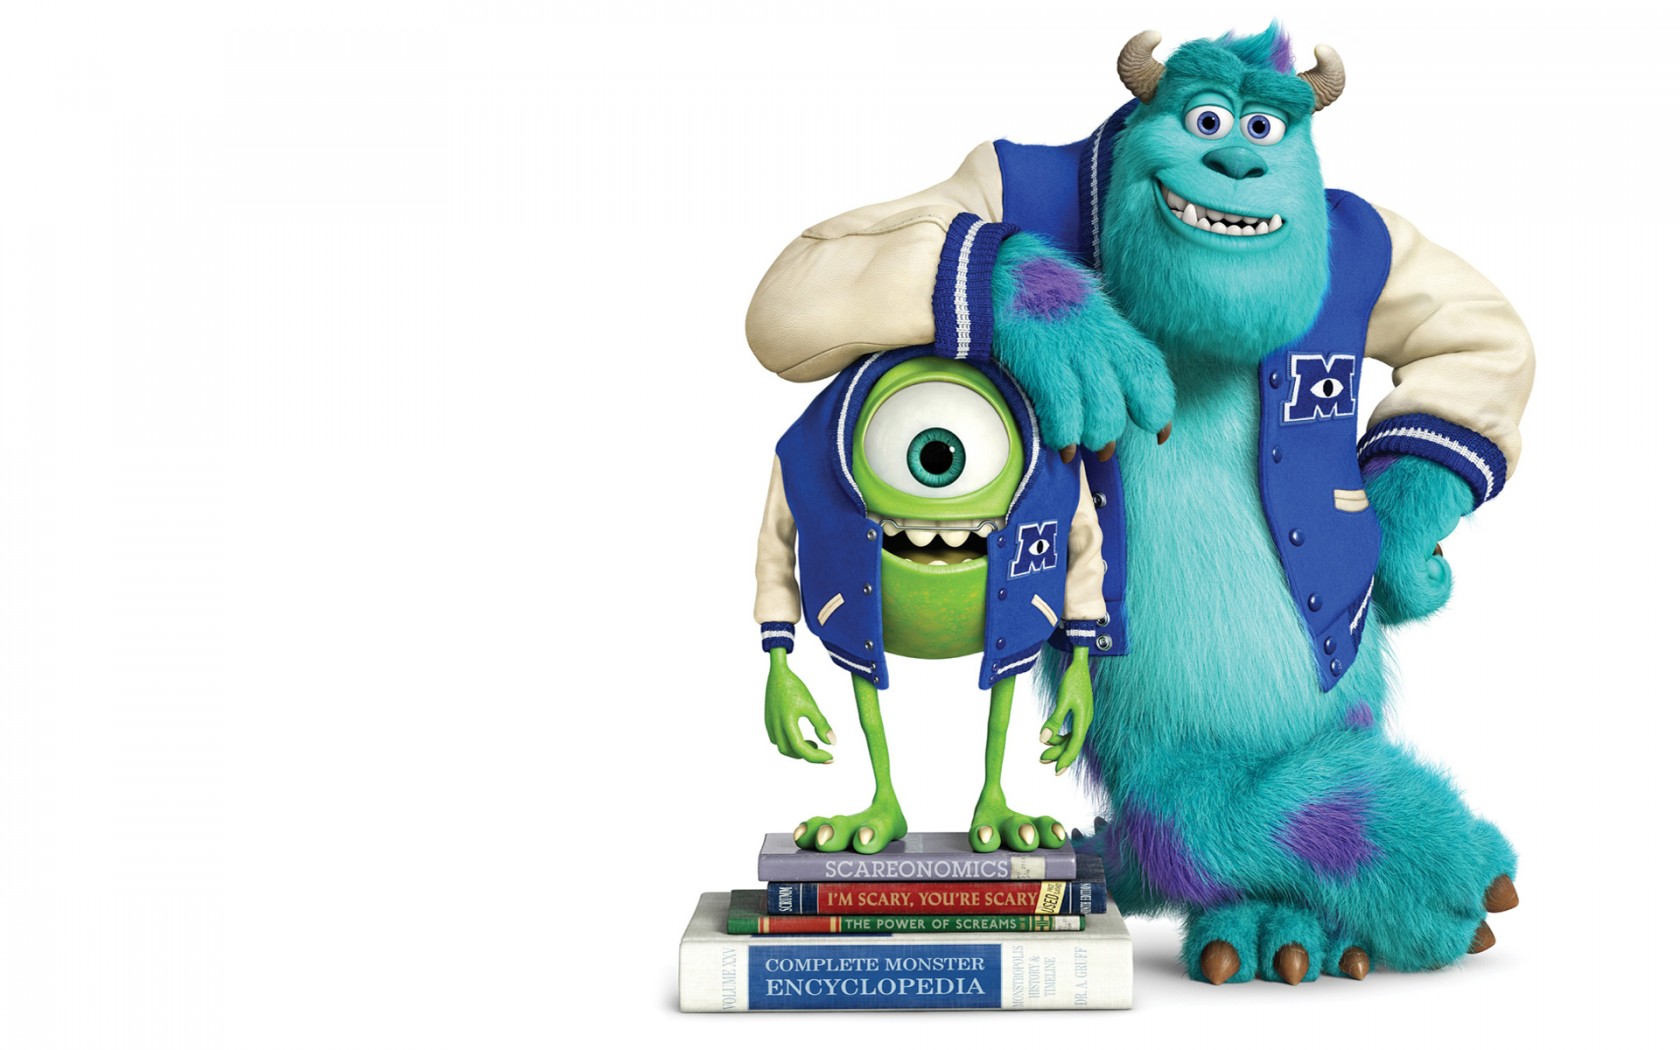 Movie Trailer: Mike and Sully’s relationship forms in Monsters University